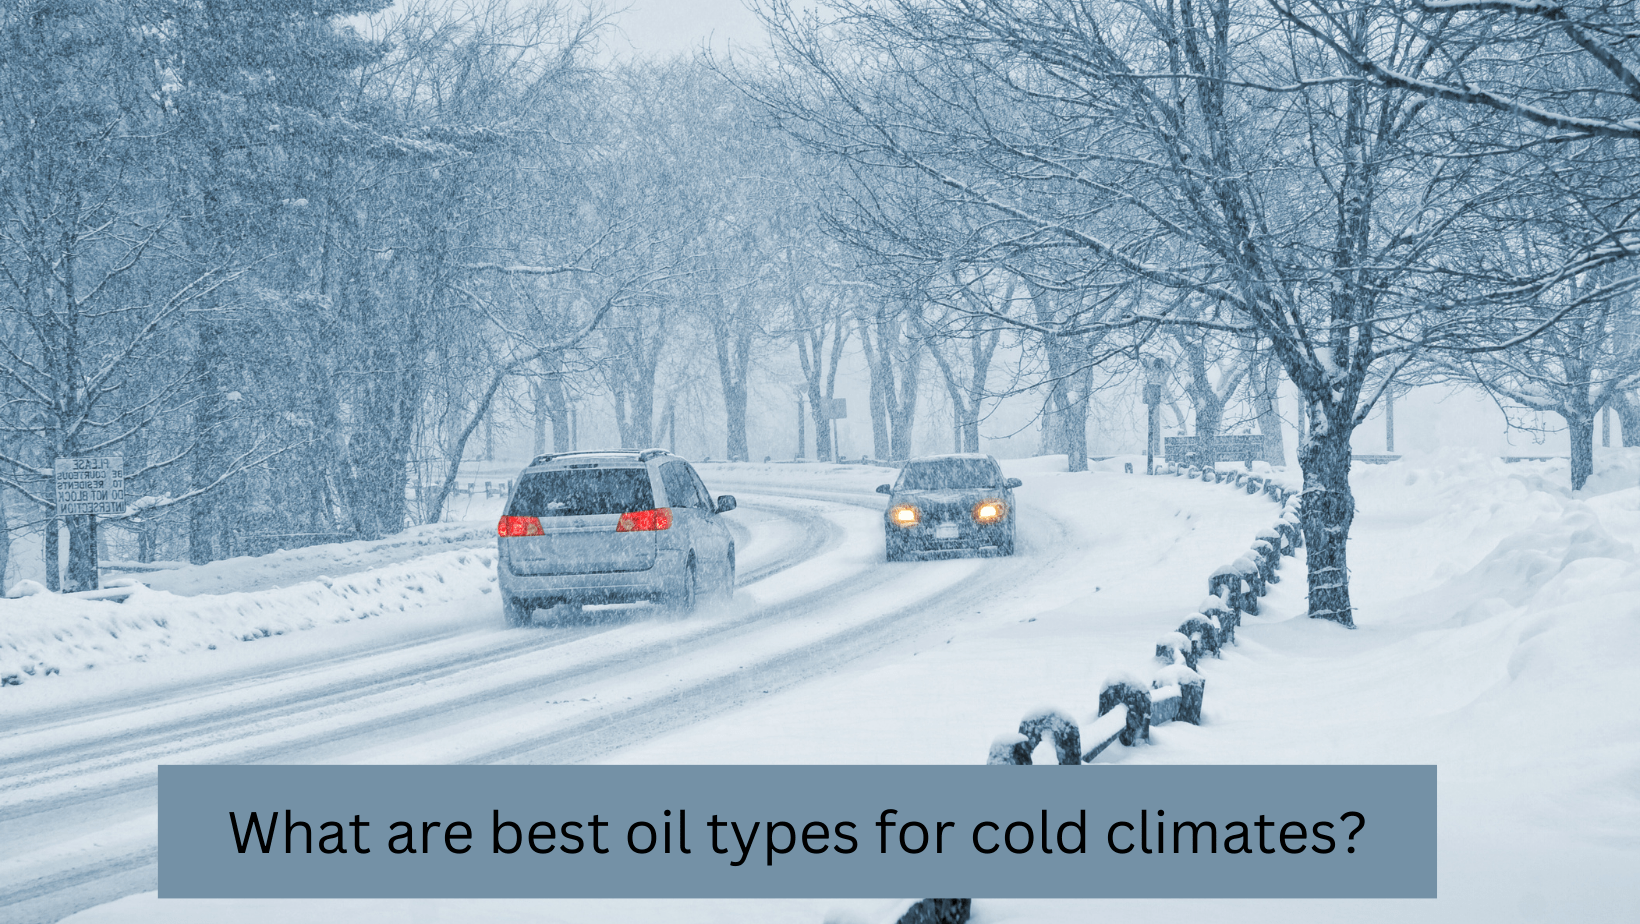 Oil types for cold climates in our guide